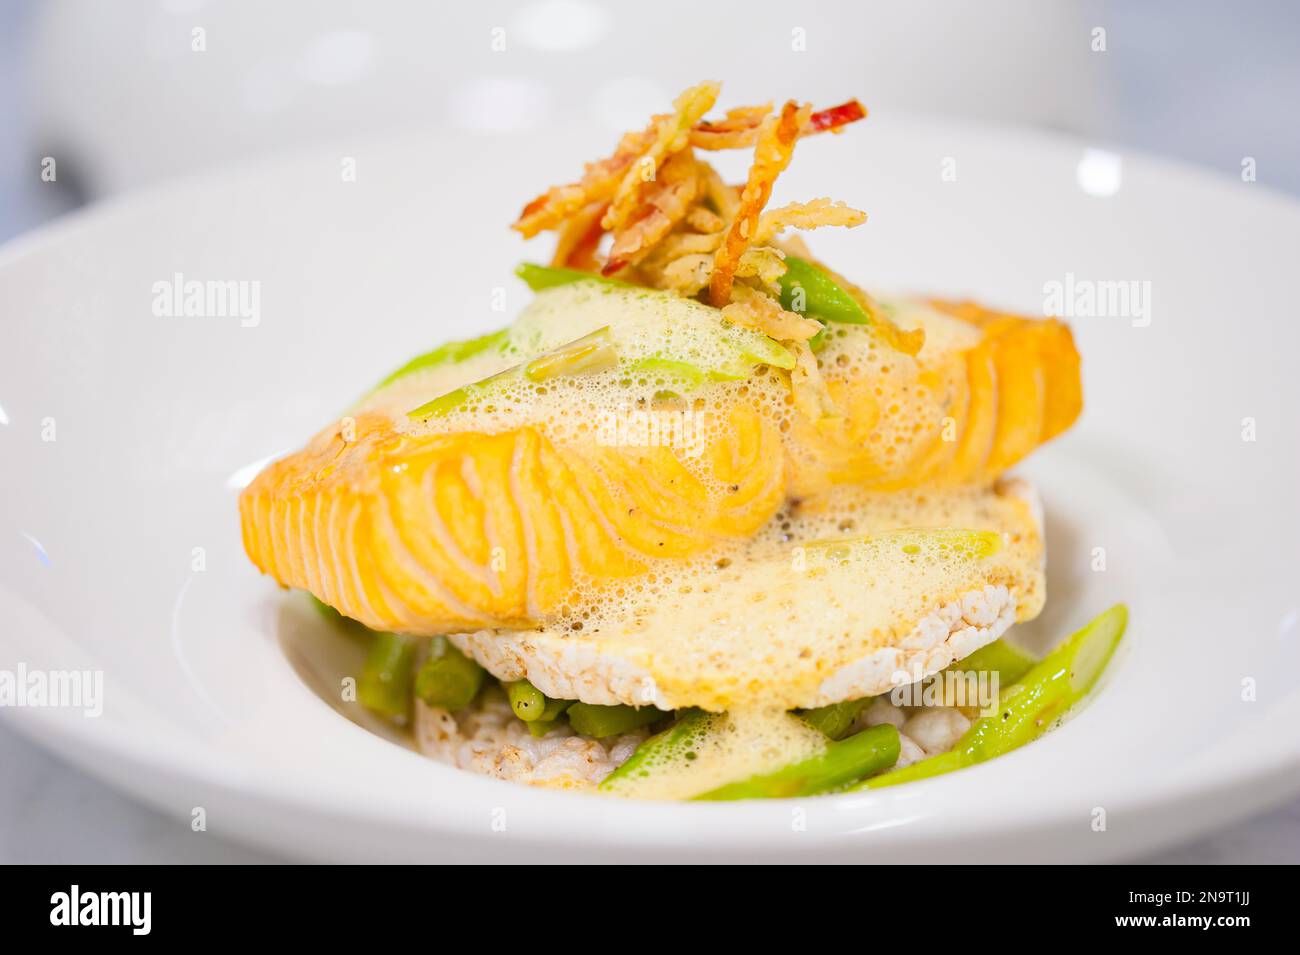 Close-up of salmon fillet with rice cakes, green beans, lemon butter garlic sauce. Seafood dish on white plate. Healthy lunch on cafe table. food, meal. Stock Photo